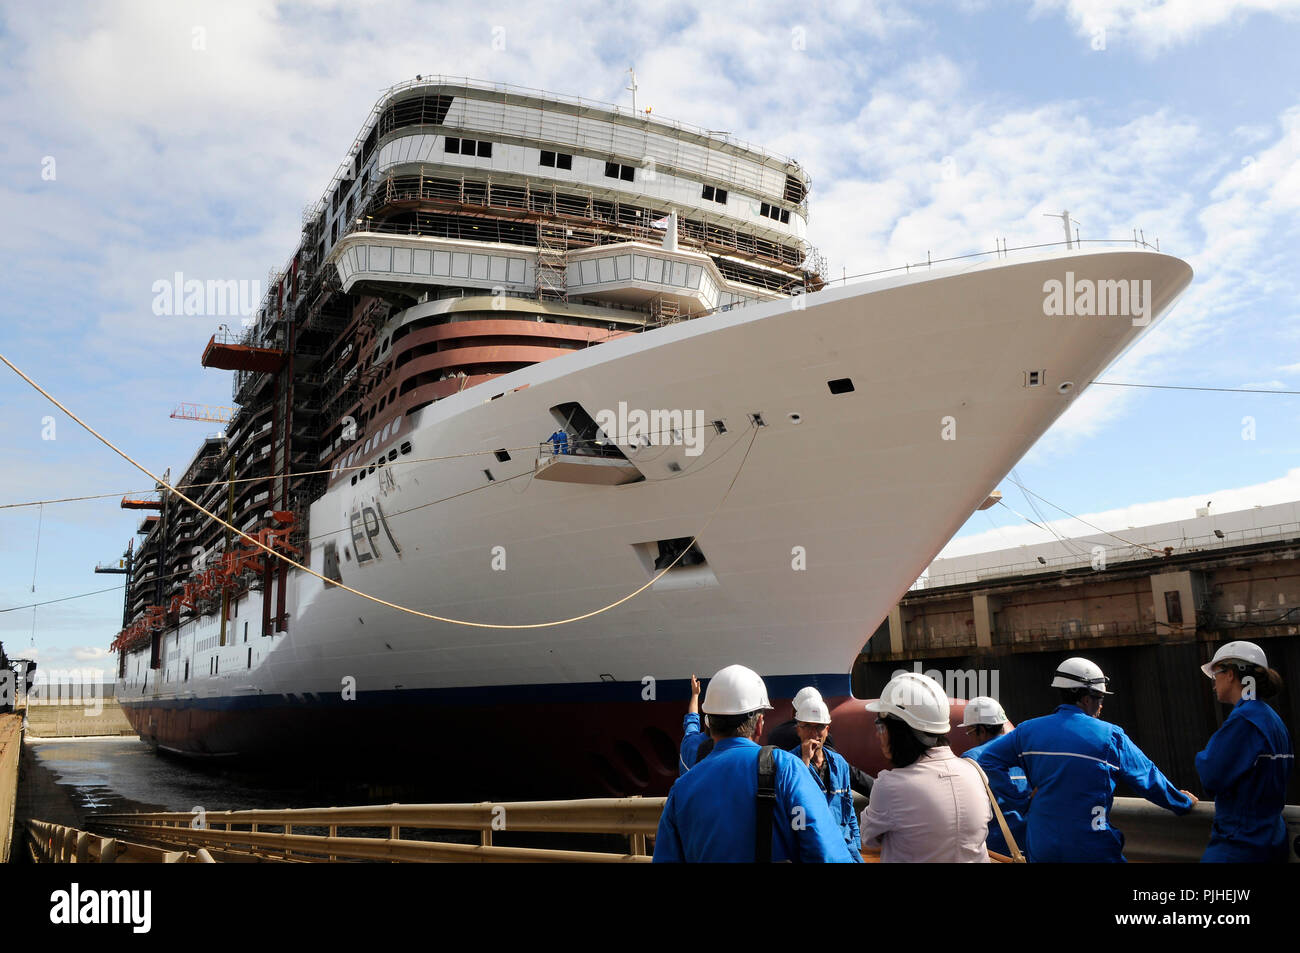 France, STX Europe shipyard in Saint-Nazaire city, Norwegian Epic cruise ship being built for the US company NCL, employees man and woman in the foreground, western France. Stock Photo